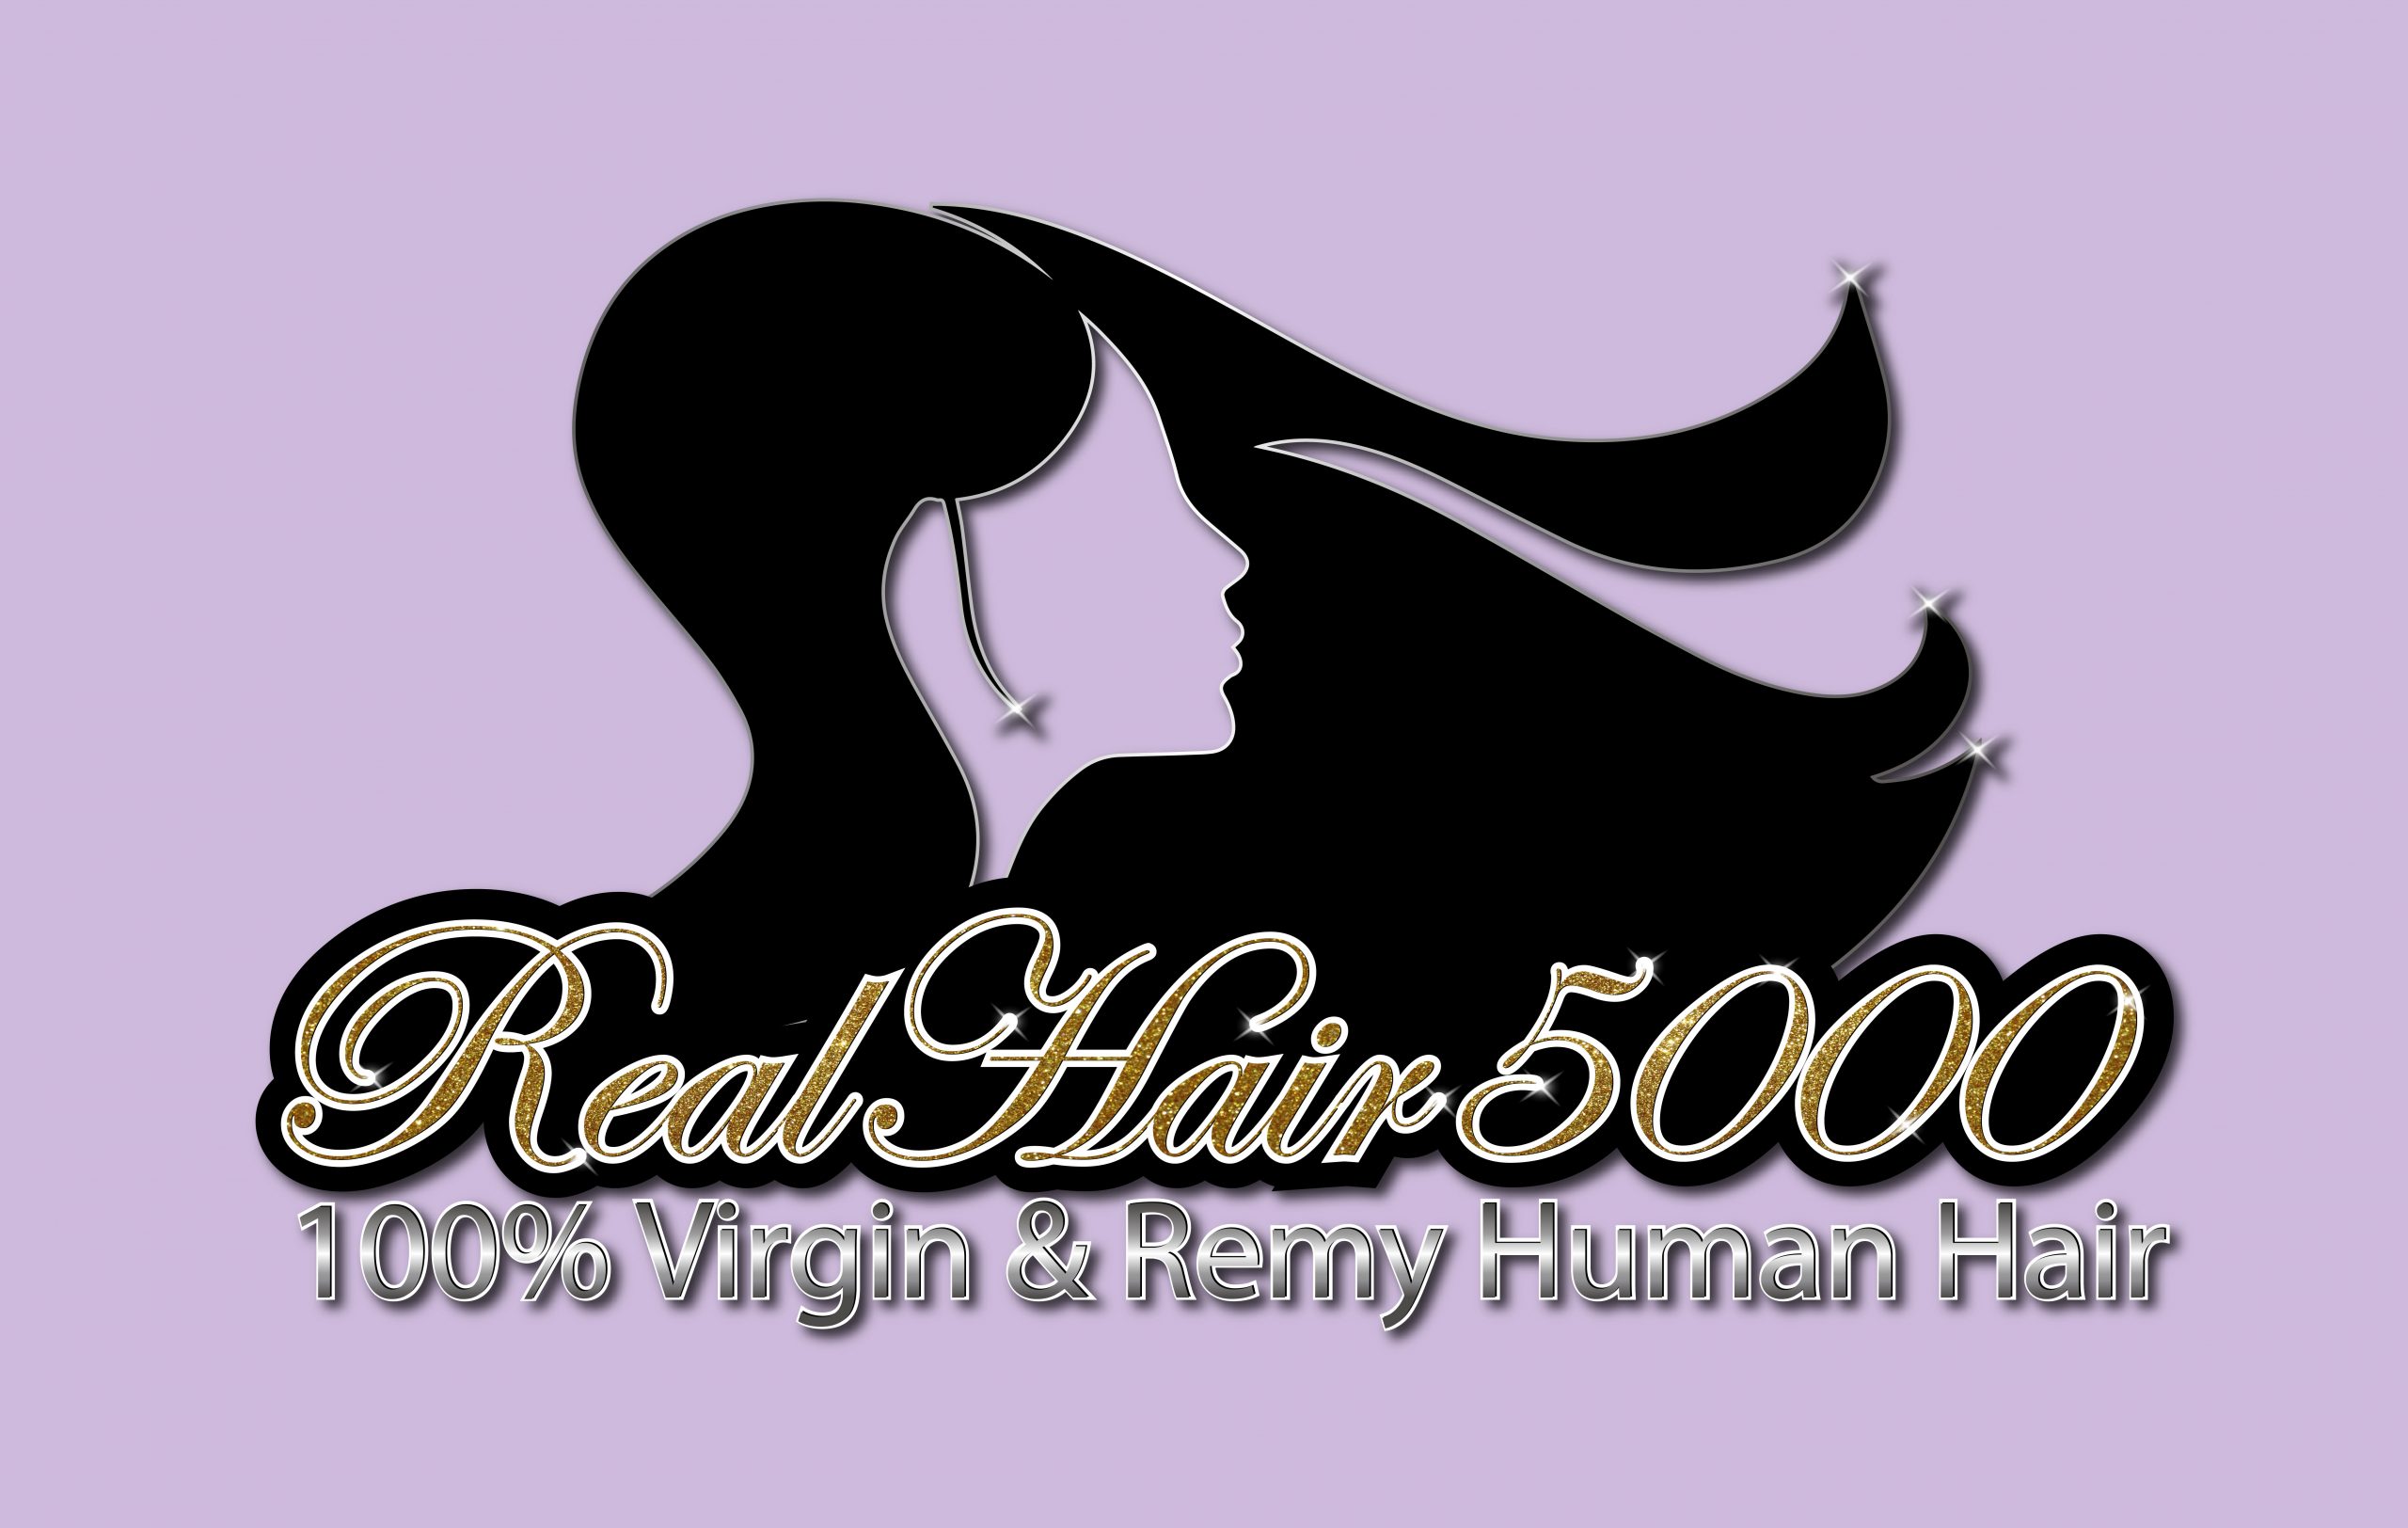 It’s Real Hair 5000